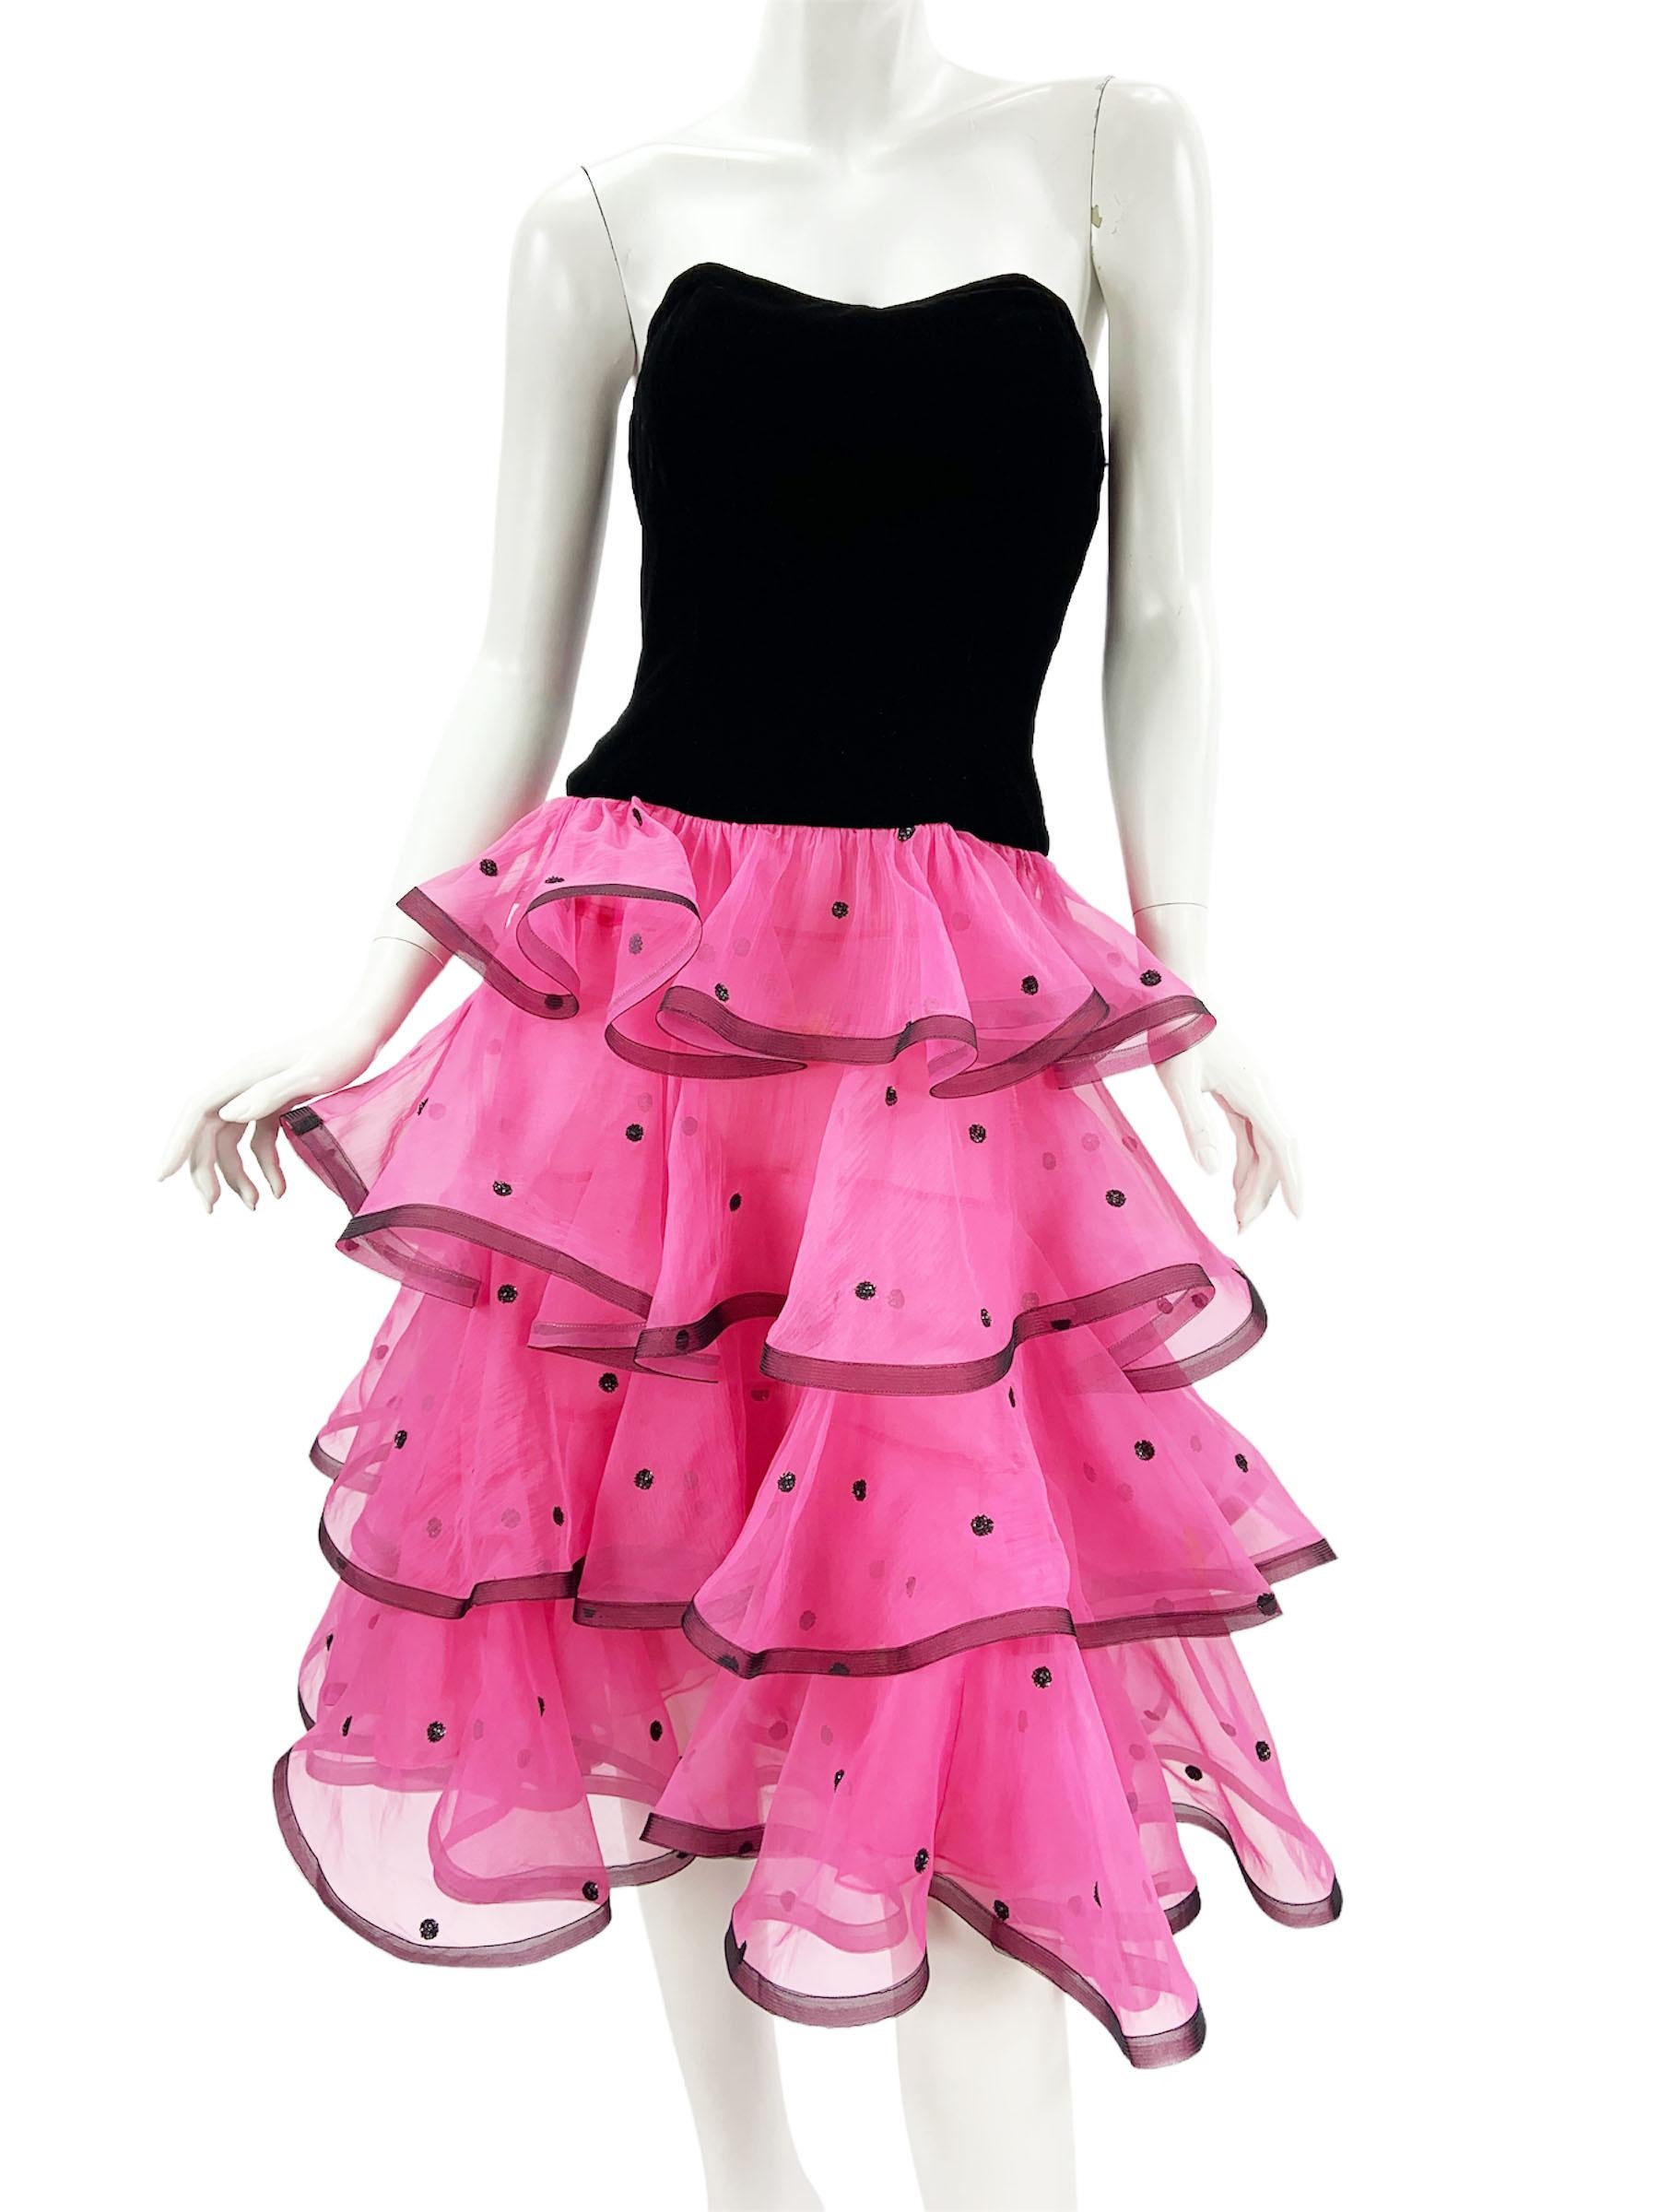 Vintage 80's Oscar de la Renta Cocktail Dress
US size - 8
Black Velvet Top with Corset, Lace Up Closure, Layered Pink Chiffon Skirt with Glitter Dots, Fully Lined, Back Zip Closure.
Measurements: Length - 35 inches ( under the arm and down), Bust -